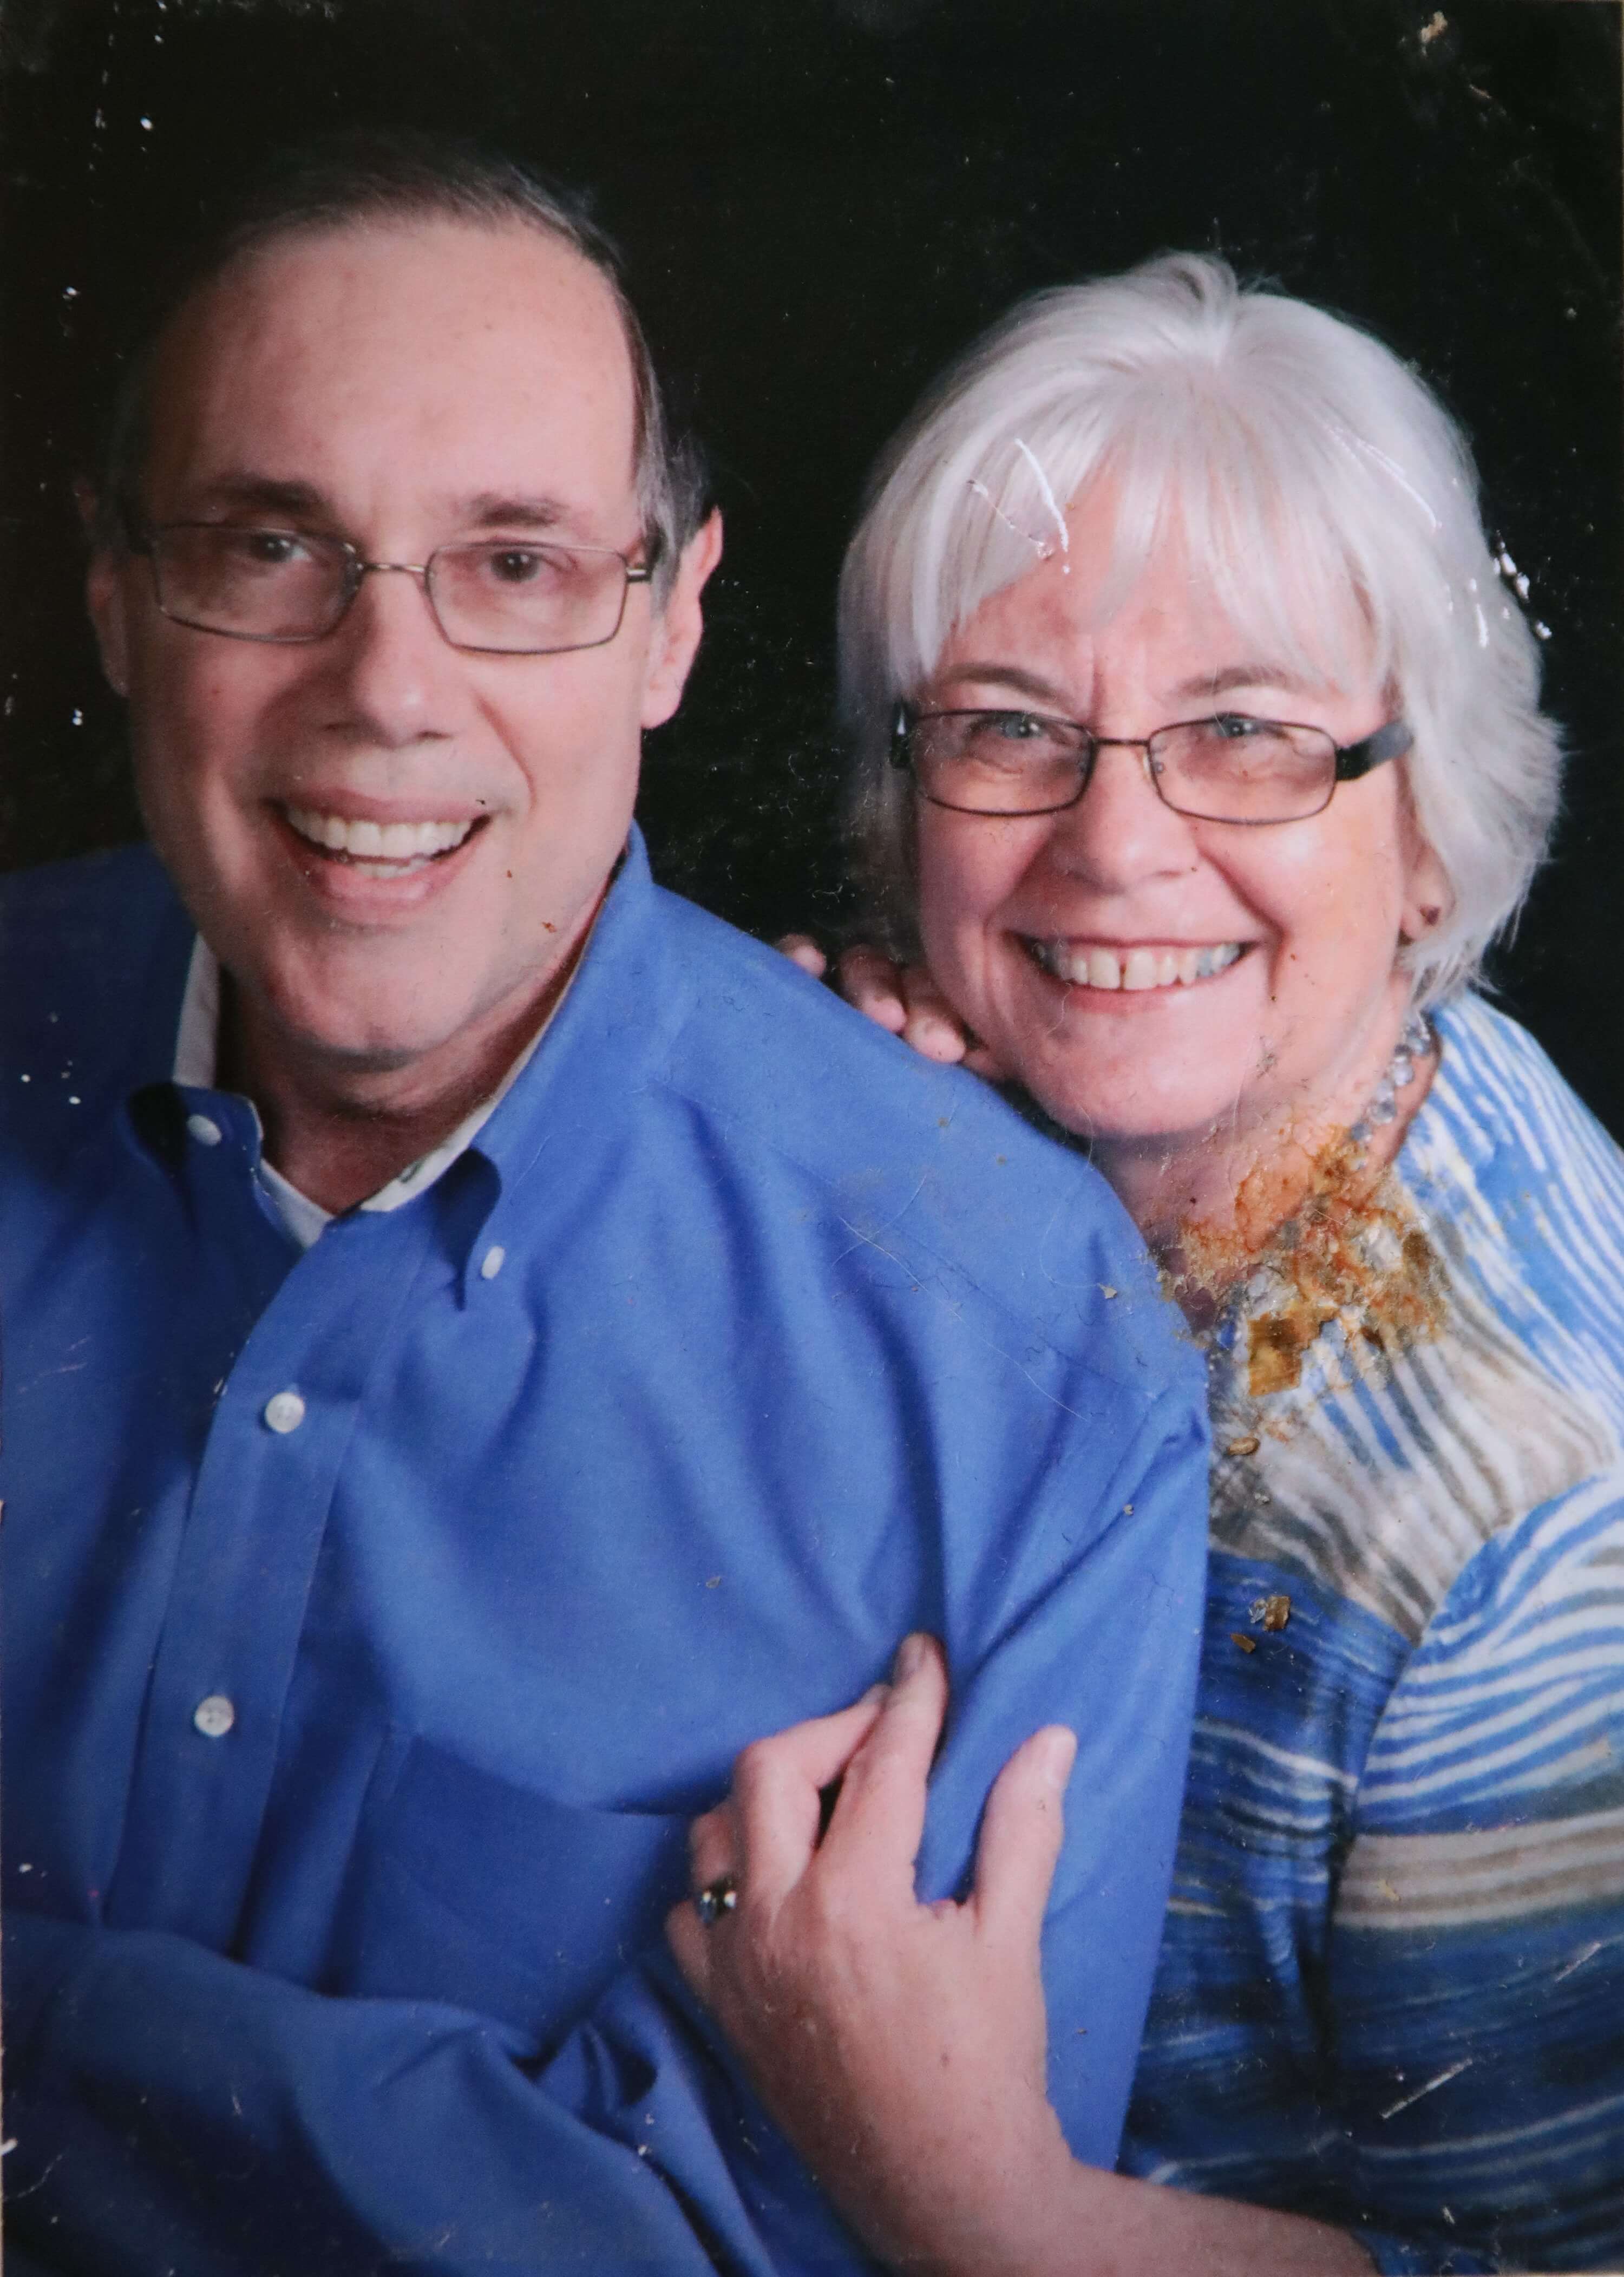 An undated photo of Ron and Mary Nicoletti as seen on Thursday, Dec. 13, 2018. Mary believes it was taken between 2012 and 2014. Ron was diagnosed with Alzheimer's eight years ago and the disease has progressed significantly. Two years ago, Mary had to place Ron in a facility when she could no longer care for him at home.